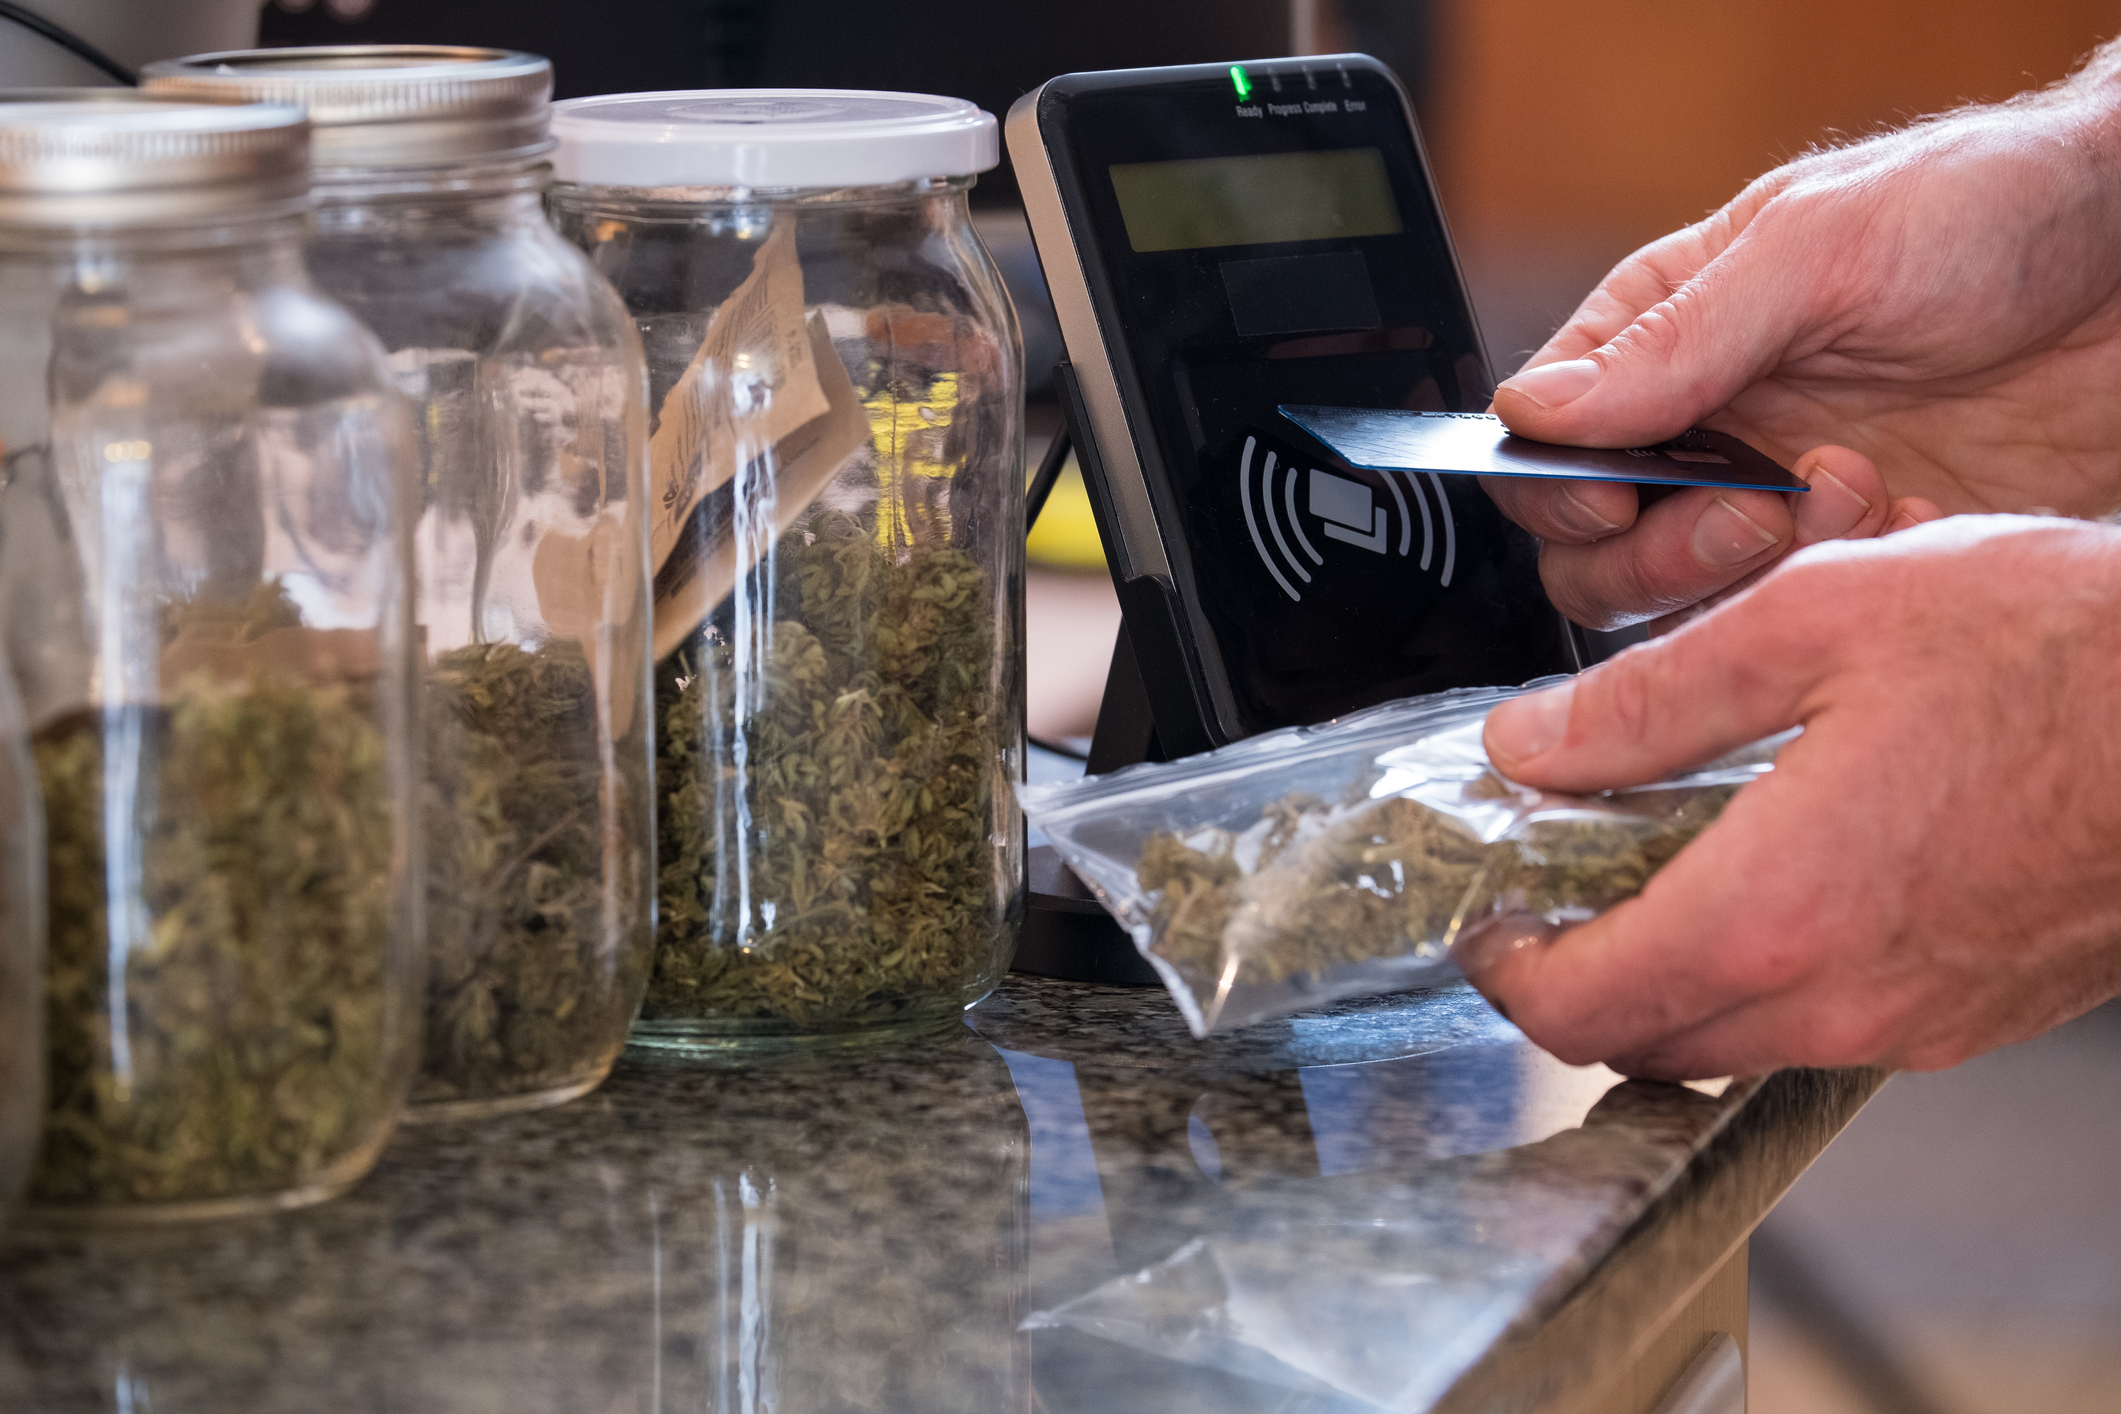 Monterey Cannabis Dispensary Receiving Local IT Support For Cannabis Businesses